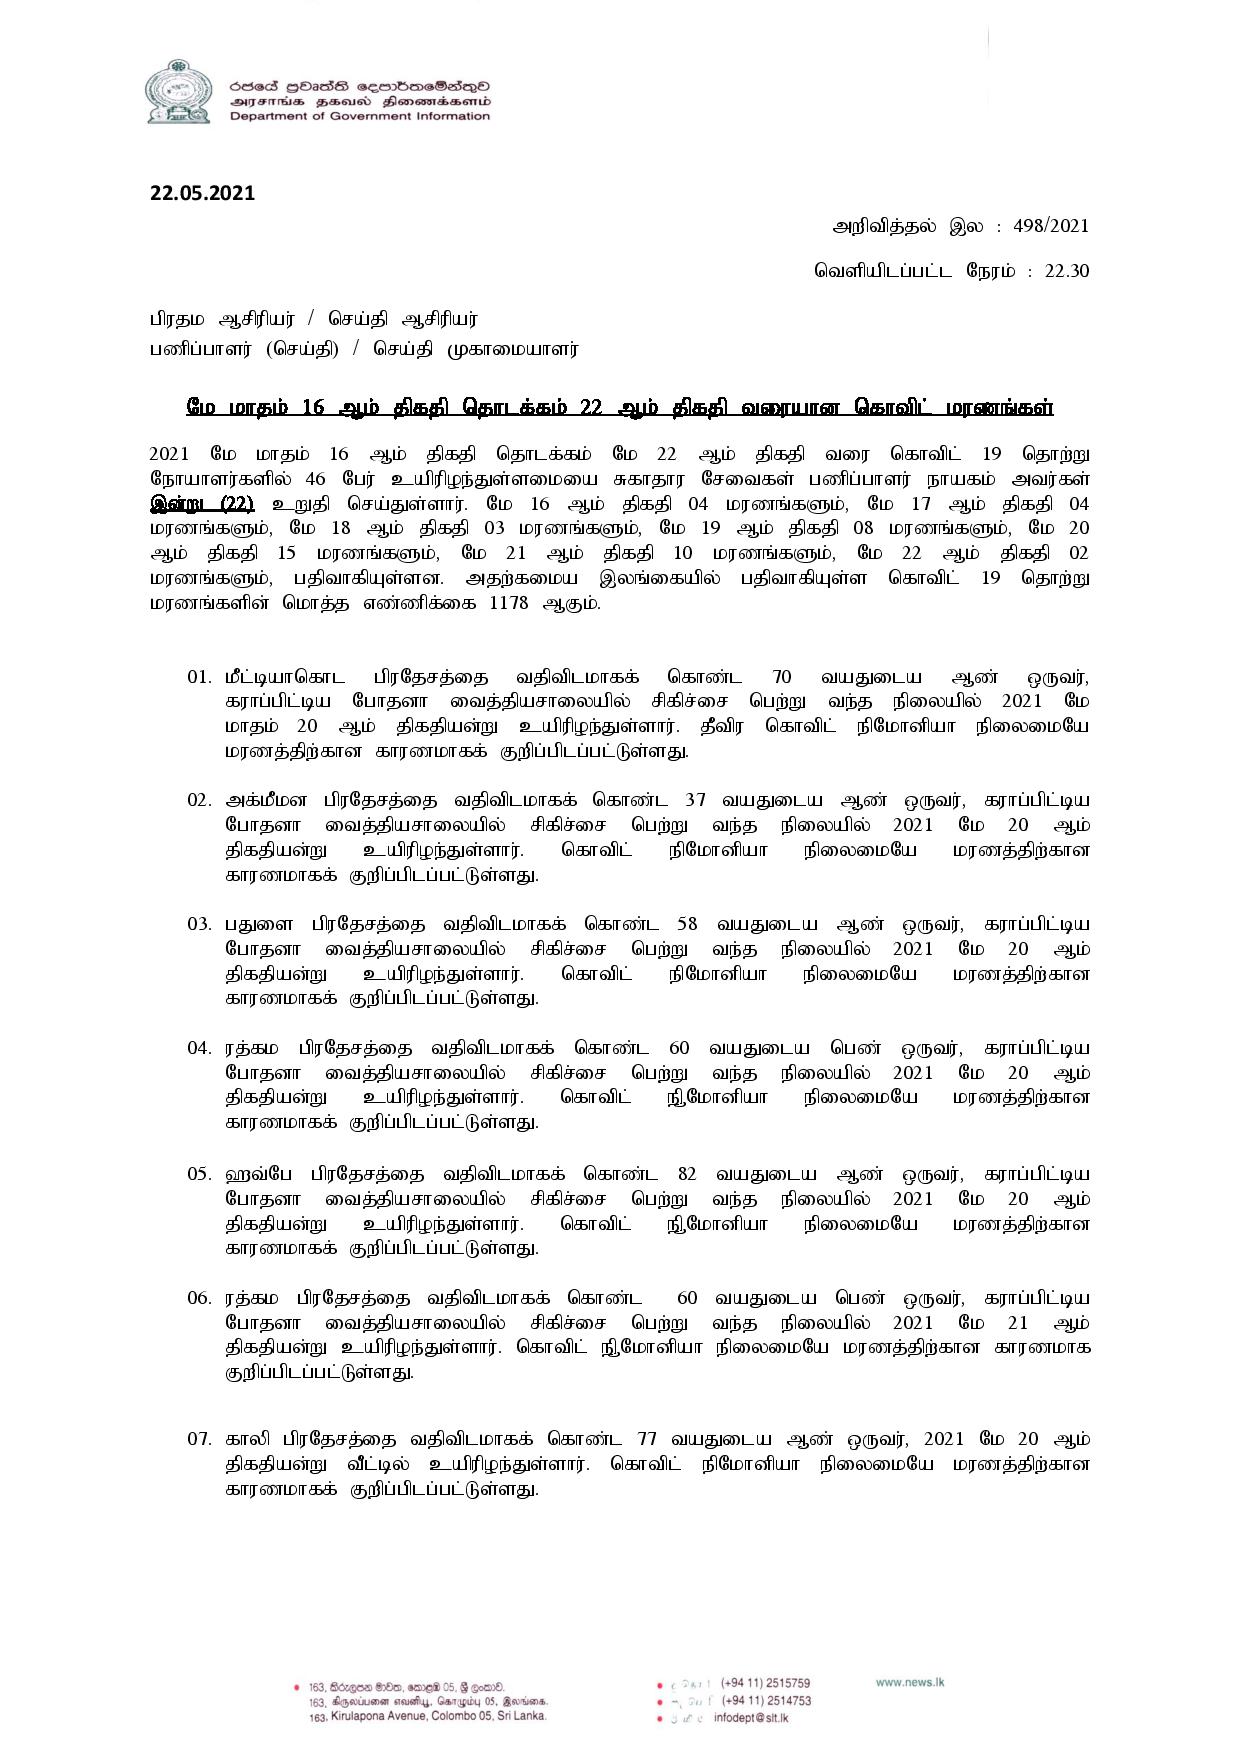 Release 498 tamil 1 page 001